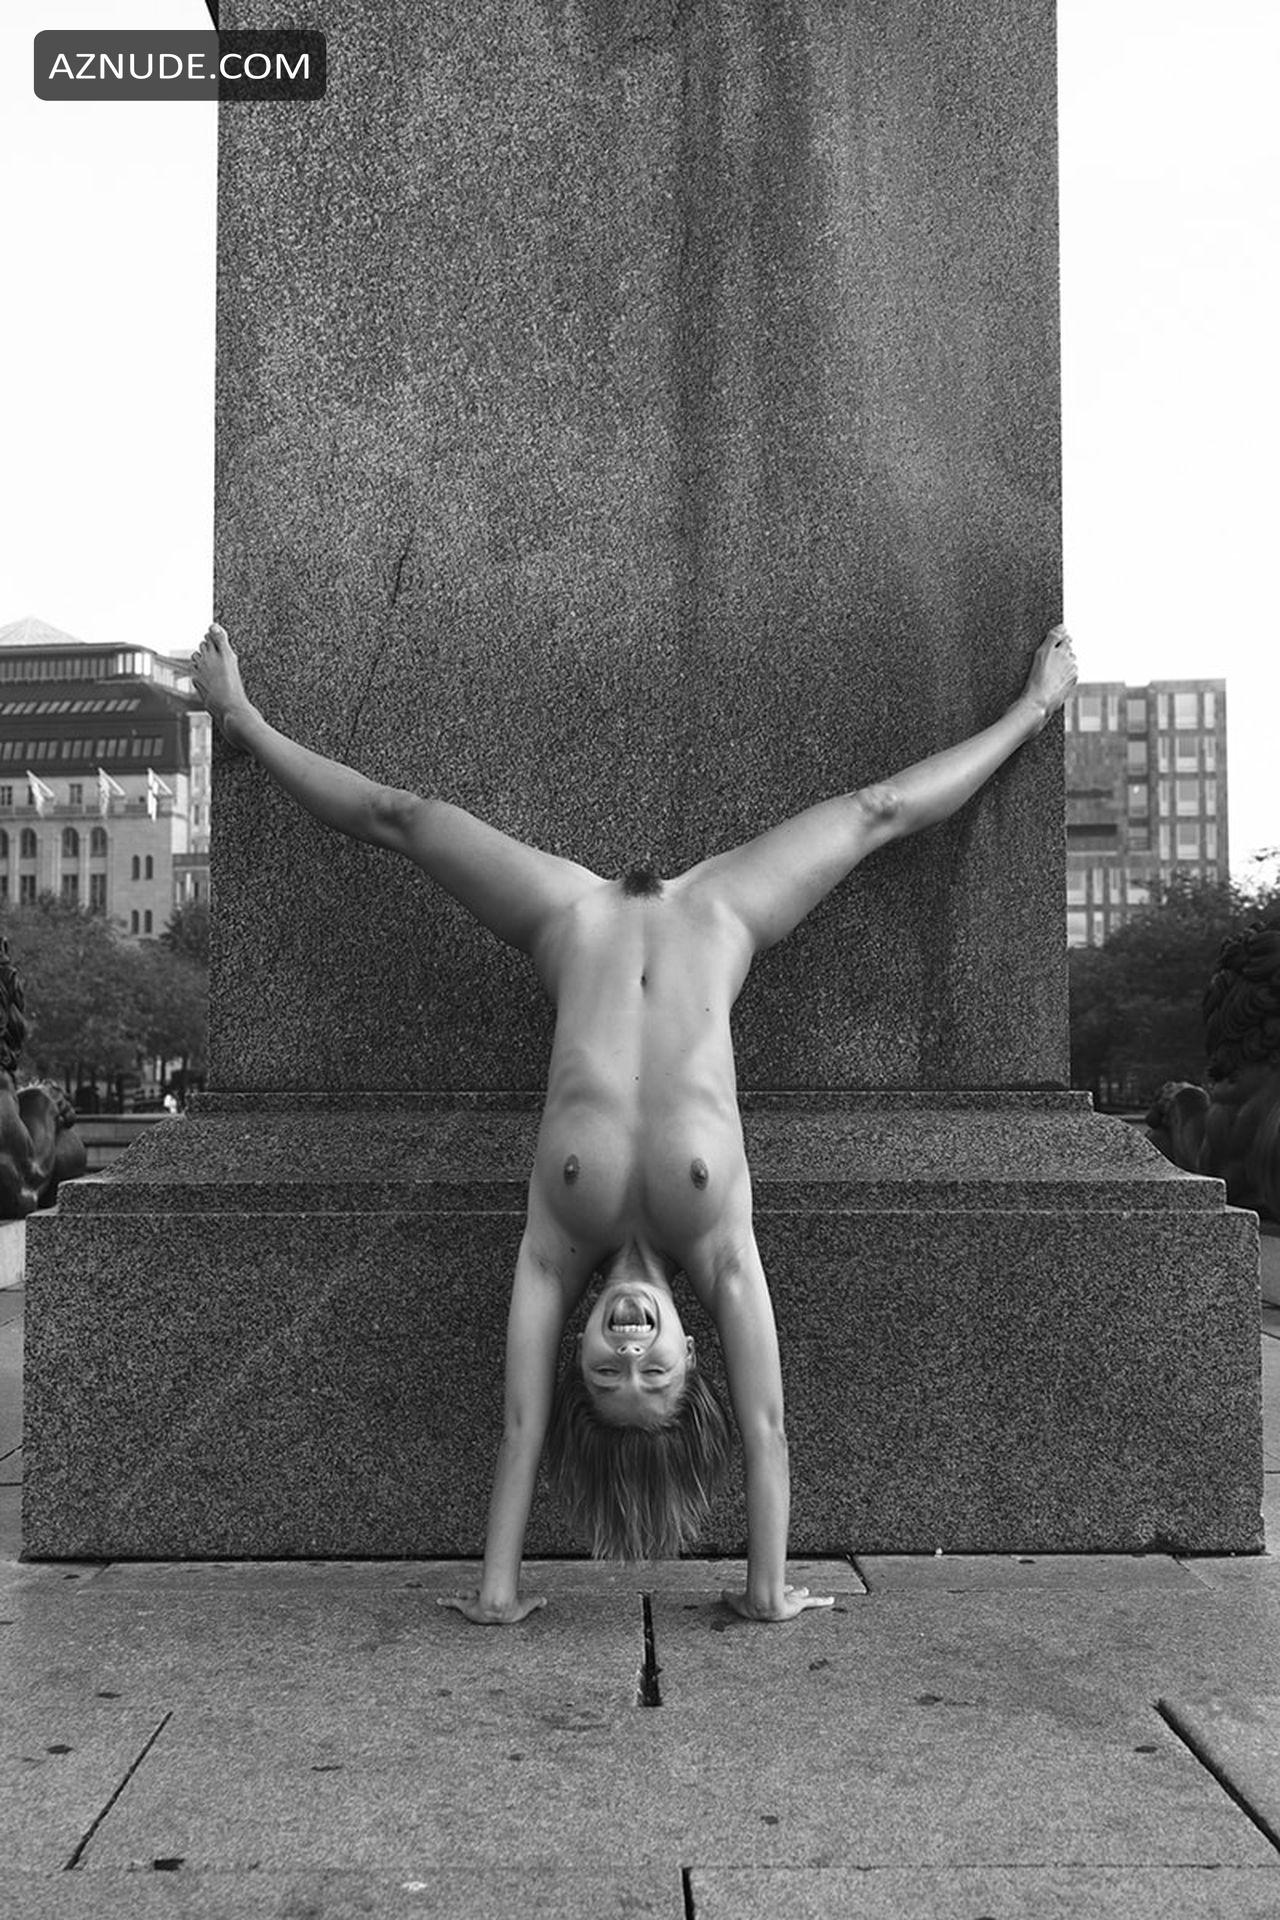 Marisa Papen Nude In In The Streets Of Stockholm Photoshoot Swedish 2019 Aznude 